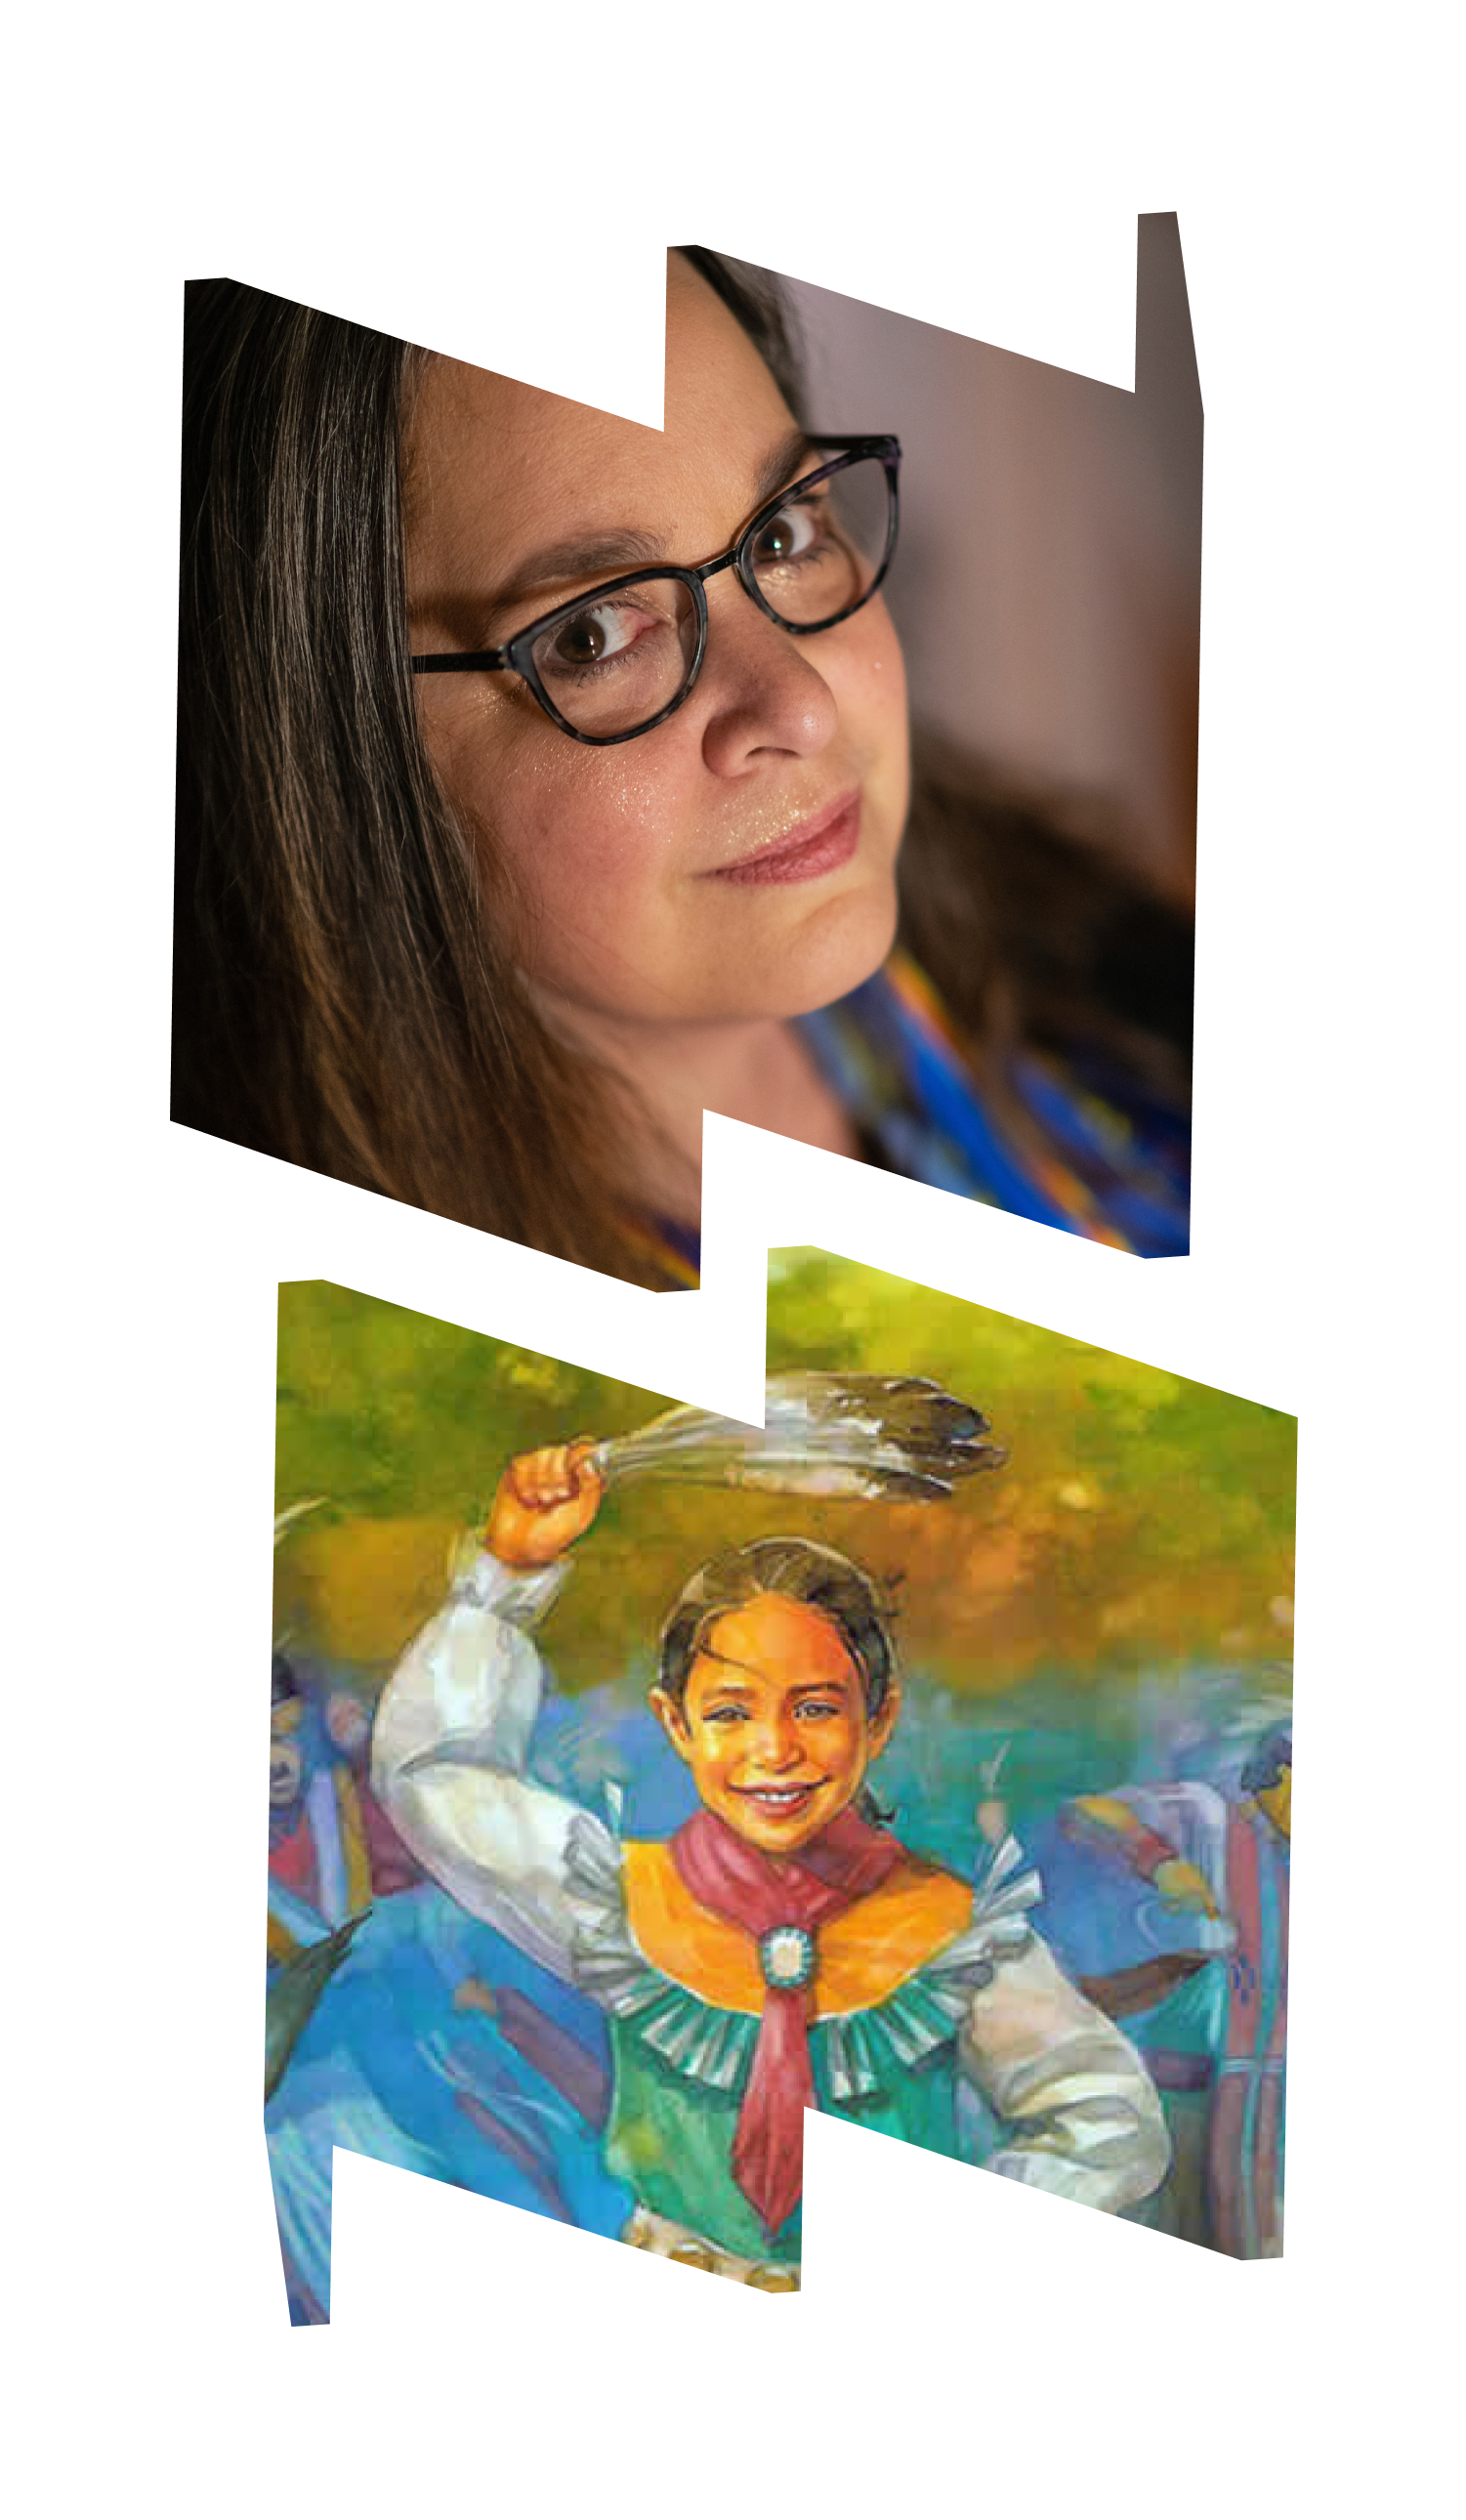 In top "W" frame, close-up, profile view of author Cynthia Leitich Smith wearing glasses; in bottom "W" frame, close up of young girl dancing and holding a feather above her head.